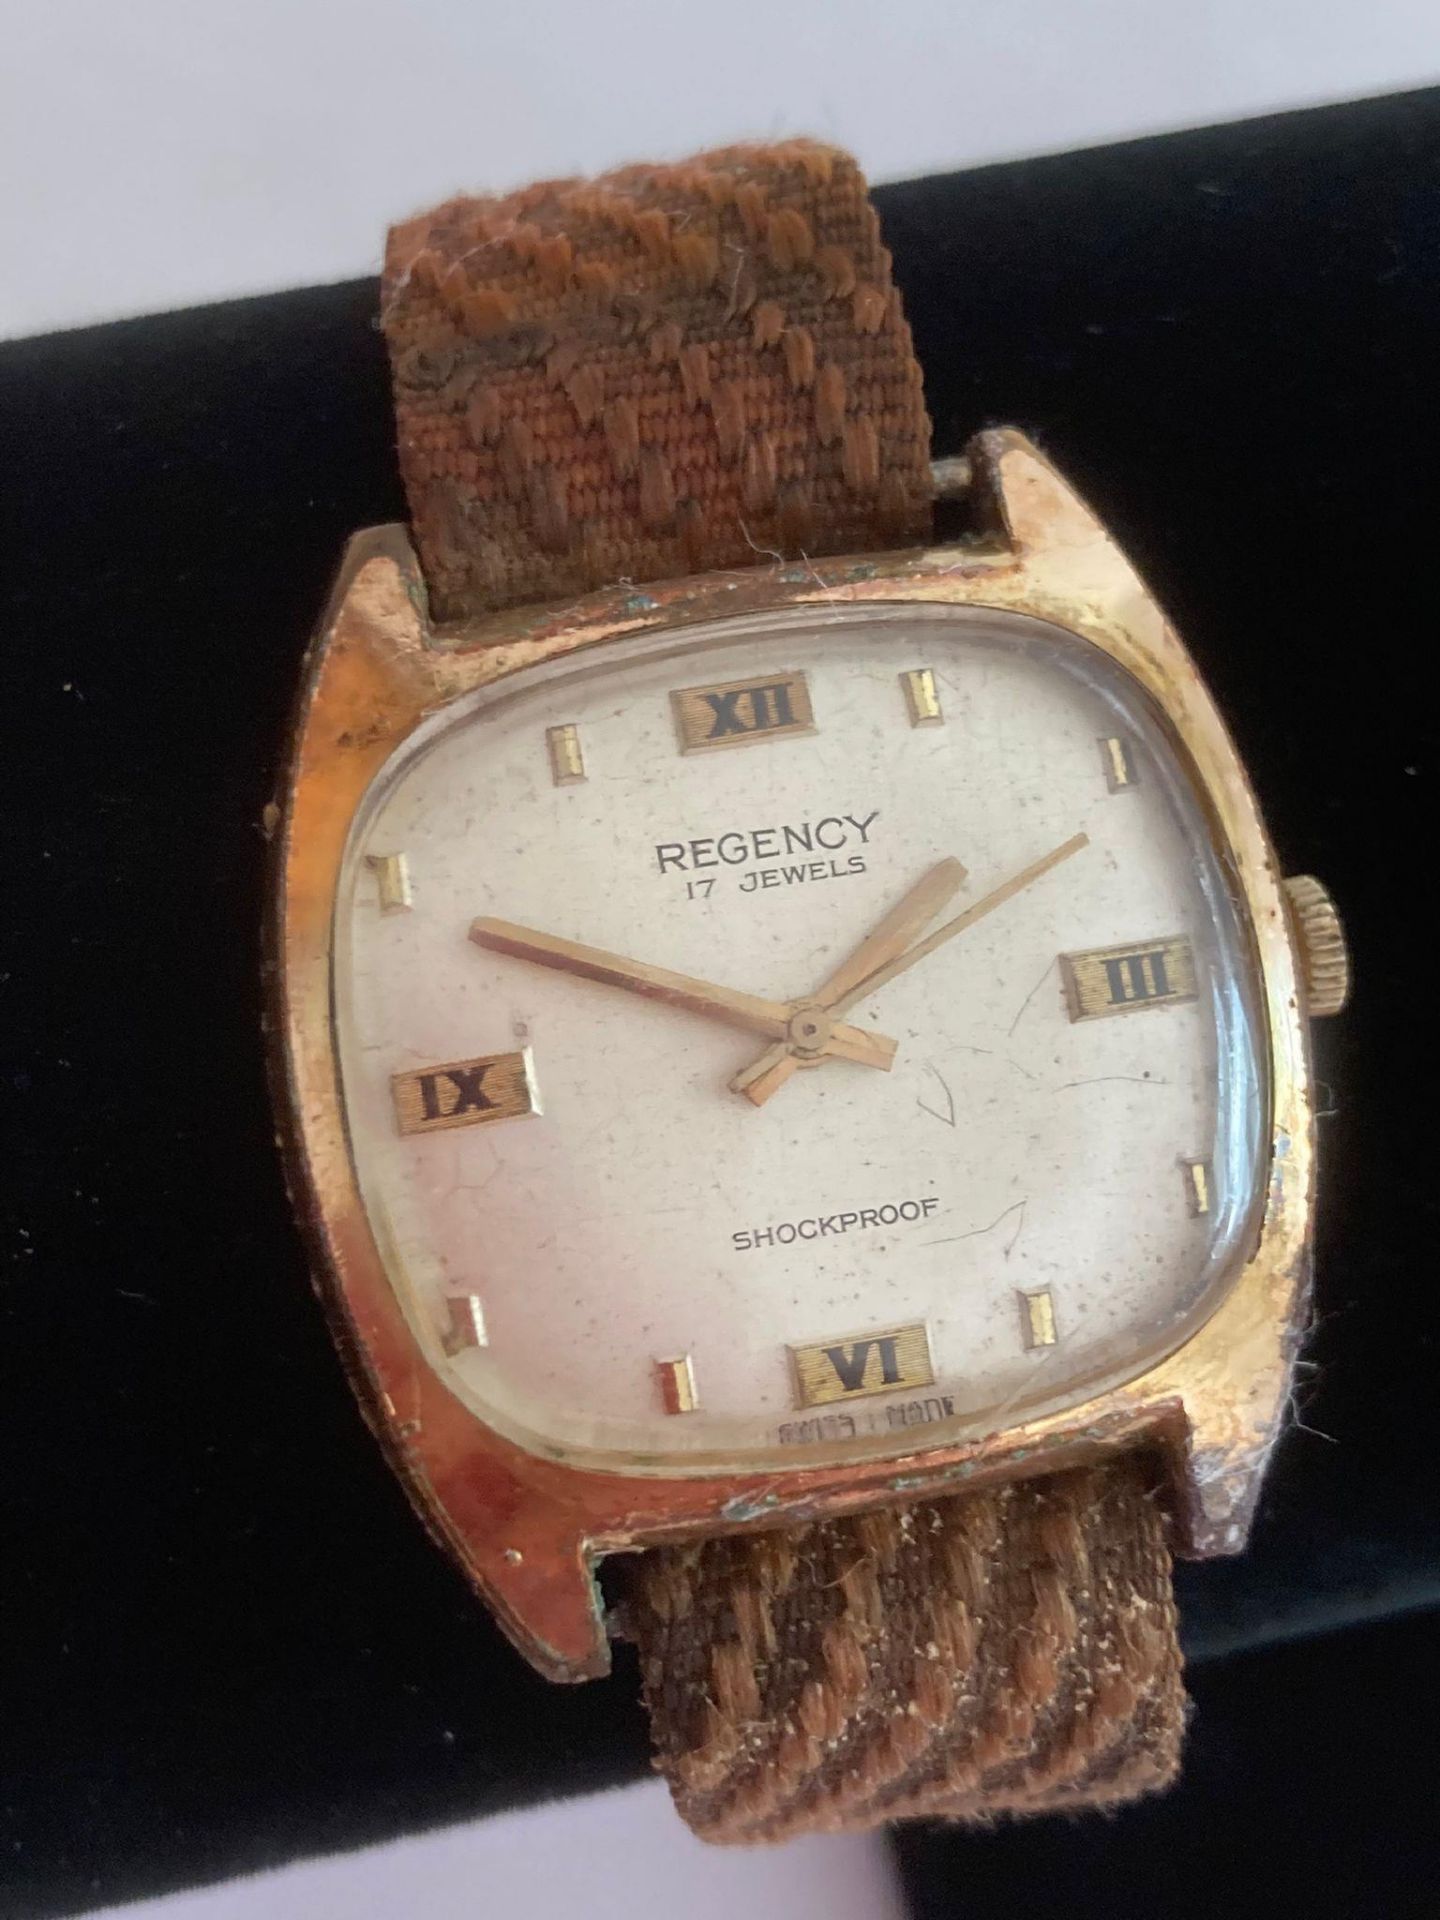 Vintage Gentleman's 1950/60’s ‘REGENCY 39’ Gold Plated (10 microns) WRISTWATCH. Swiss Made. Rare